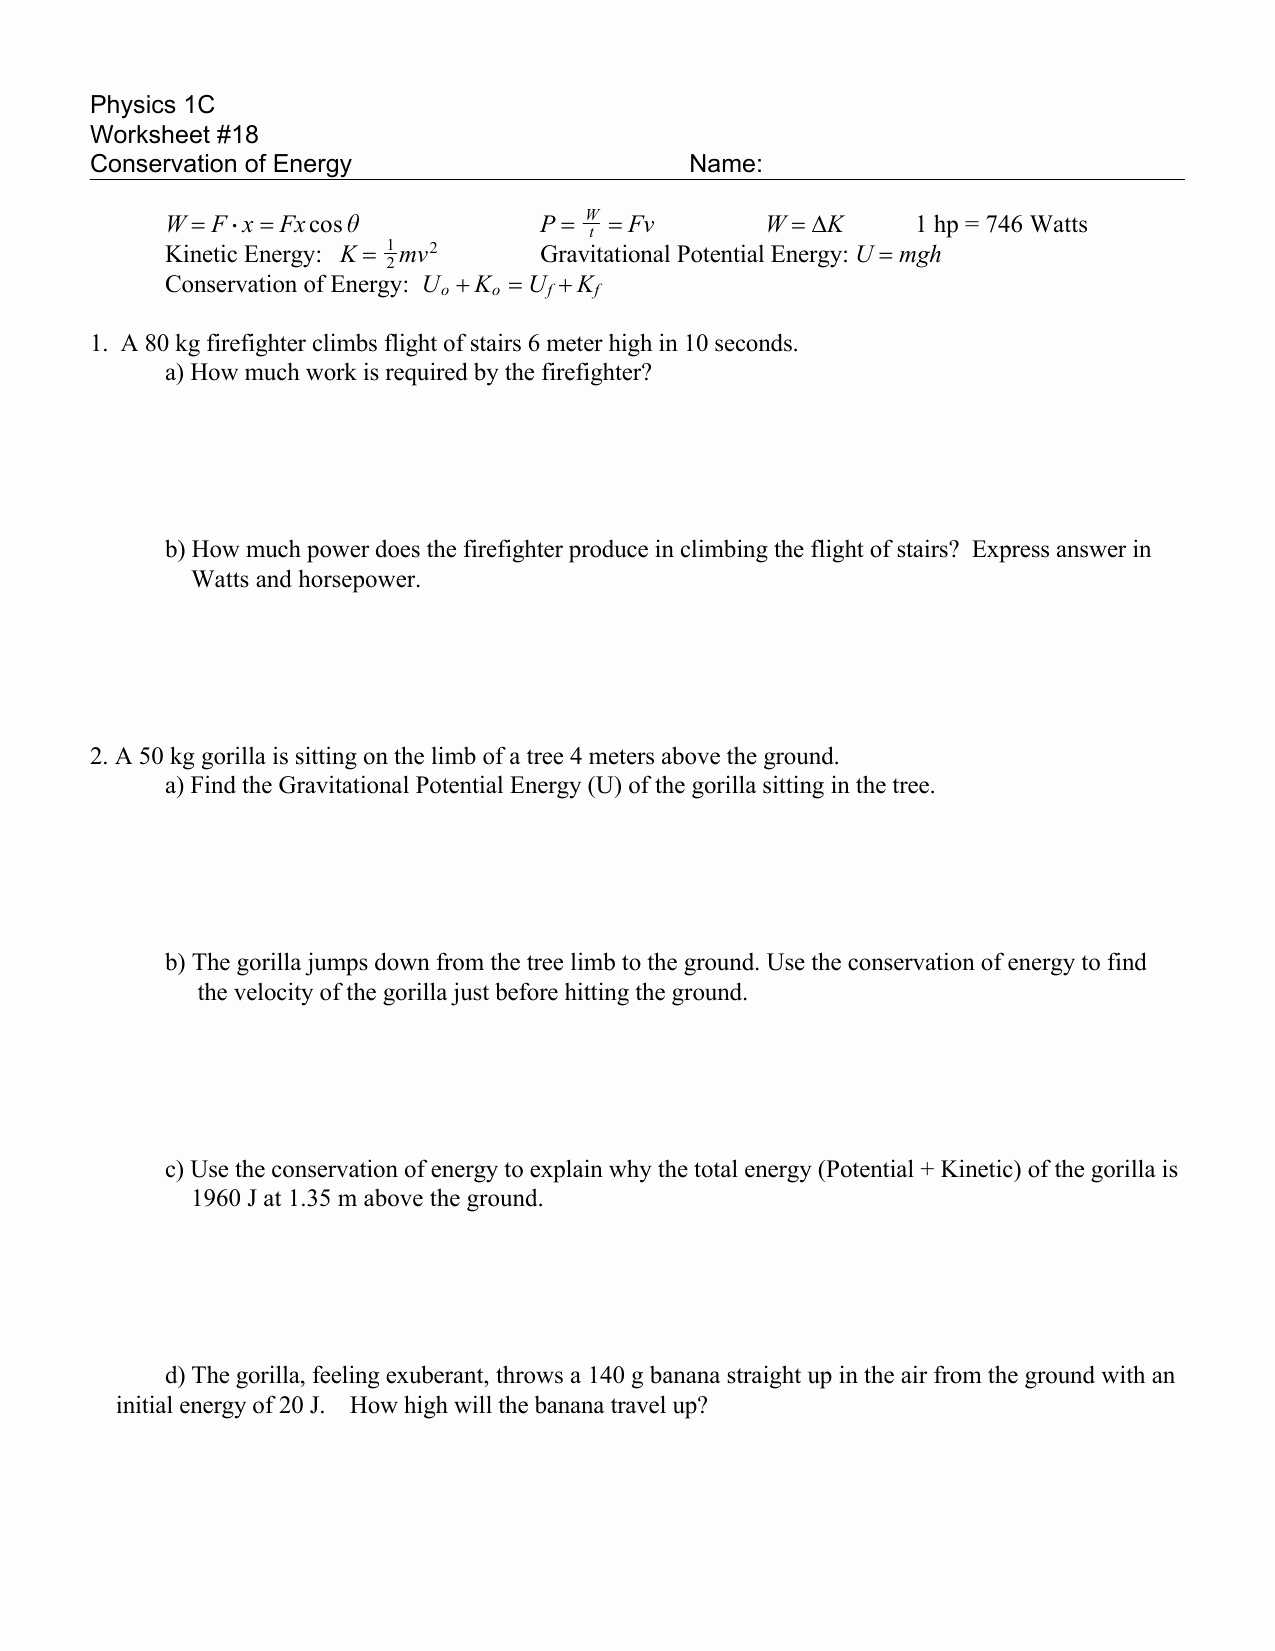 Electrical Power and Energy Worksheet with Collection Of Kinetic and Potential Energy Worksheet with Answers